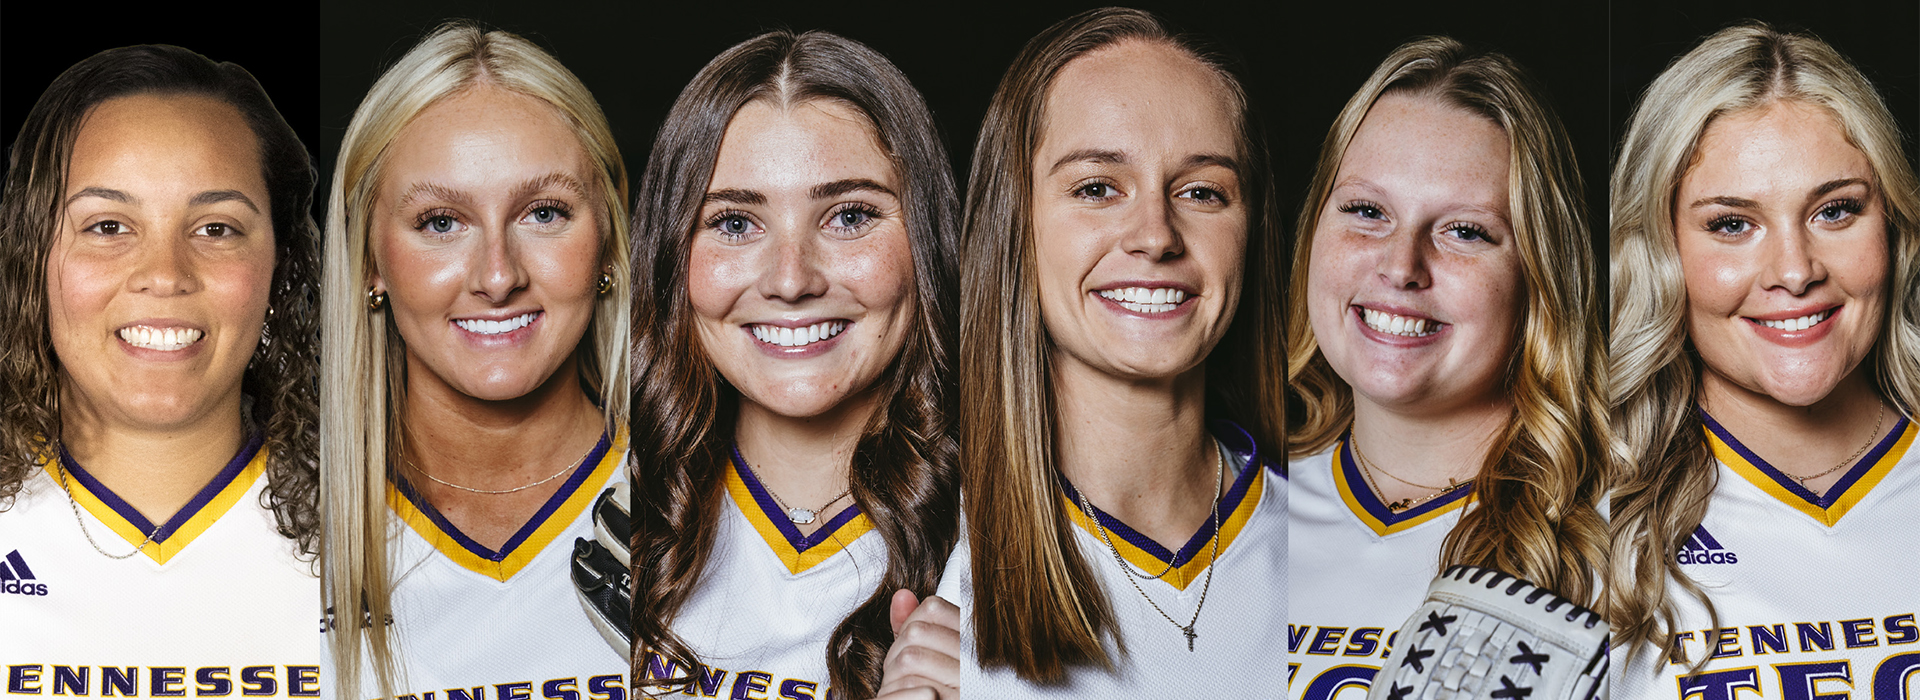 Senior Day a highlight of weekend series vs. SIUE